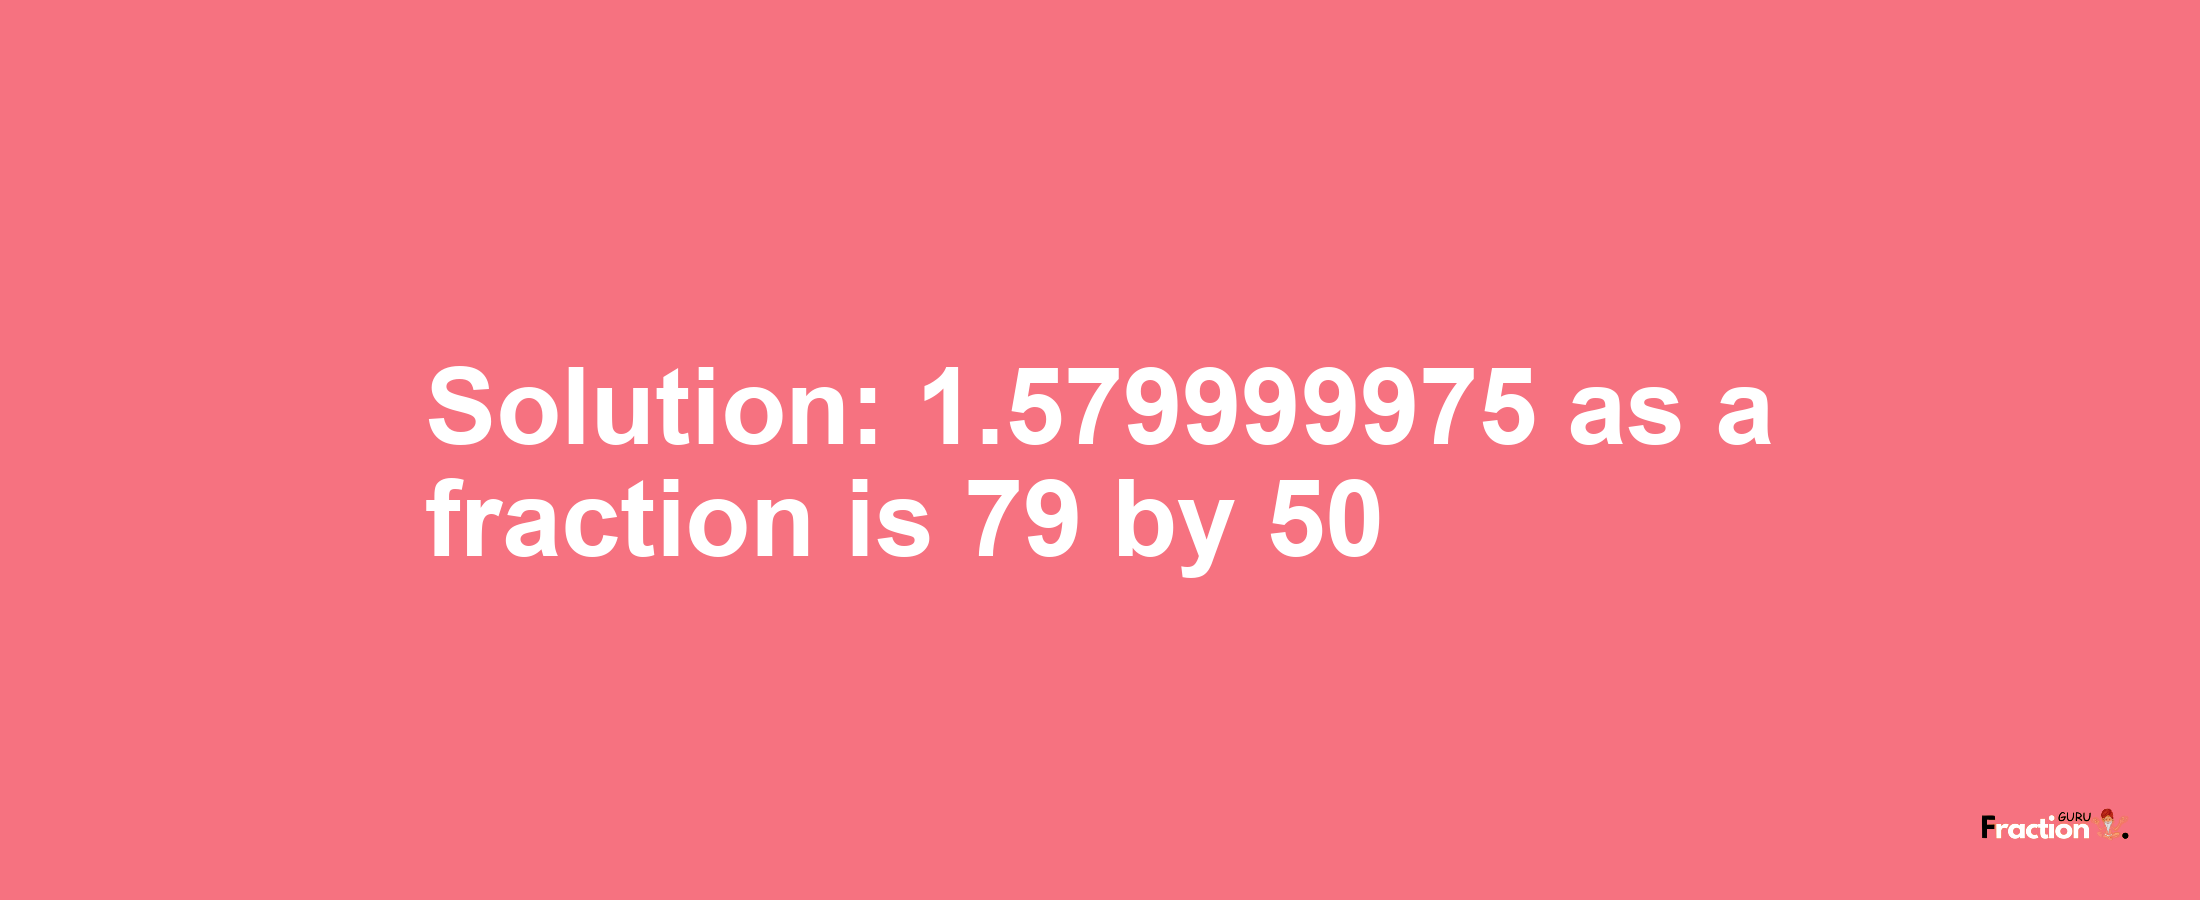 Solution:1.579999975 as a fraction is 79/50